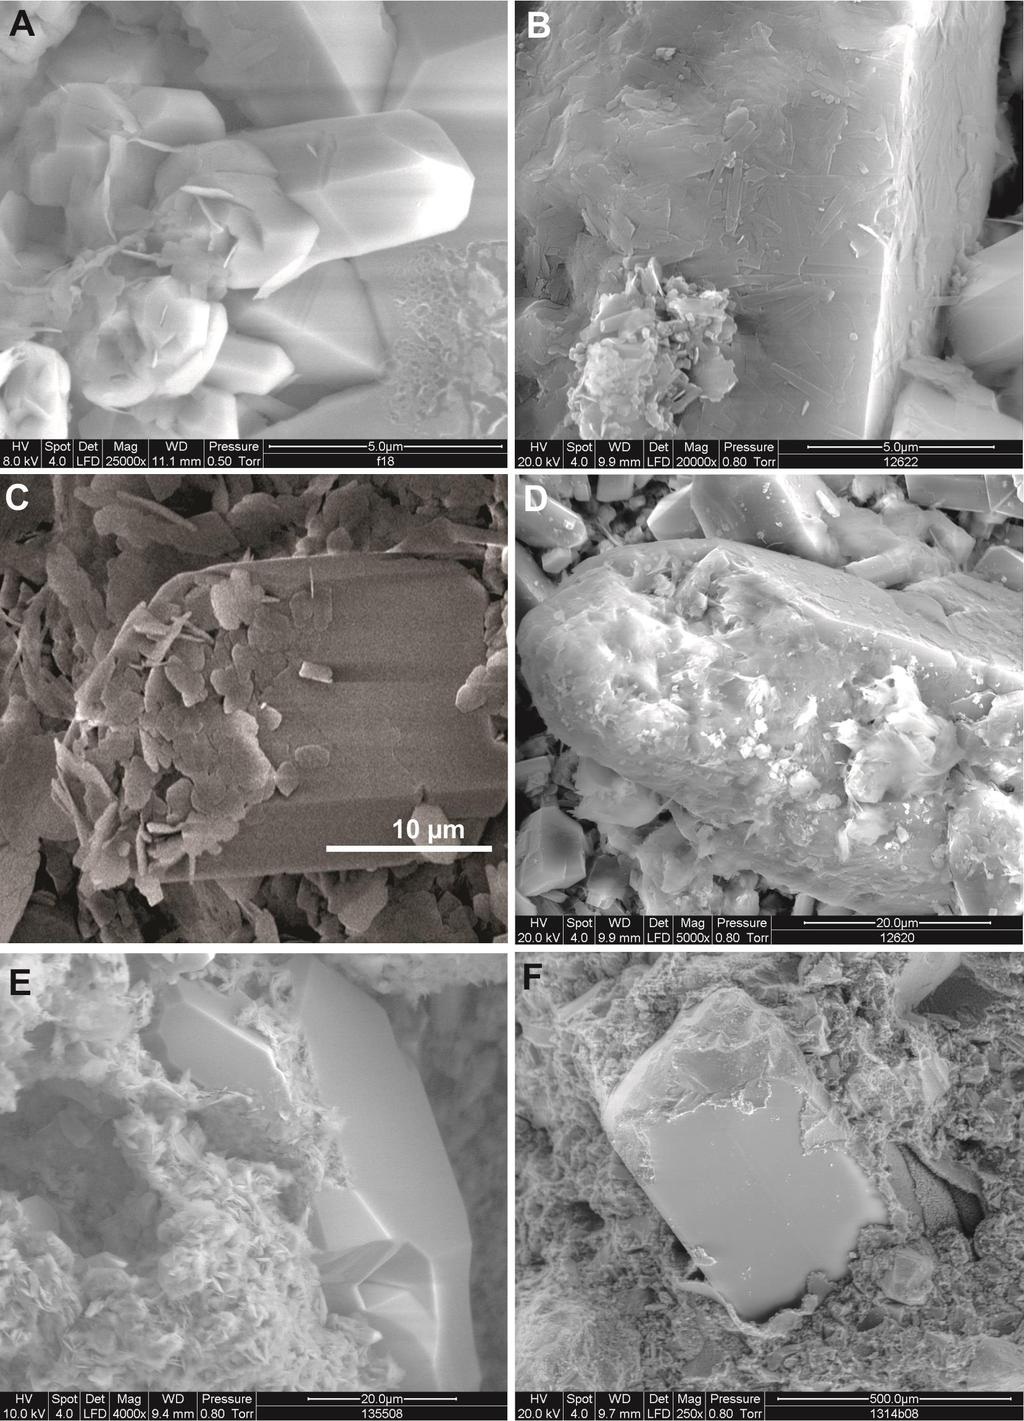 Figure 4: SEM images display various degrees of crystal degradation and clearly reveal the spatial relationships between crystals and clays.